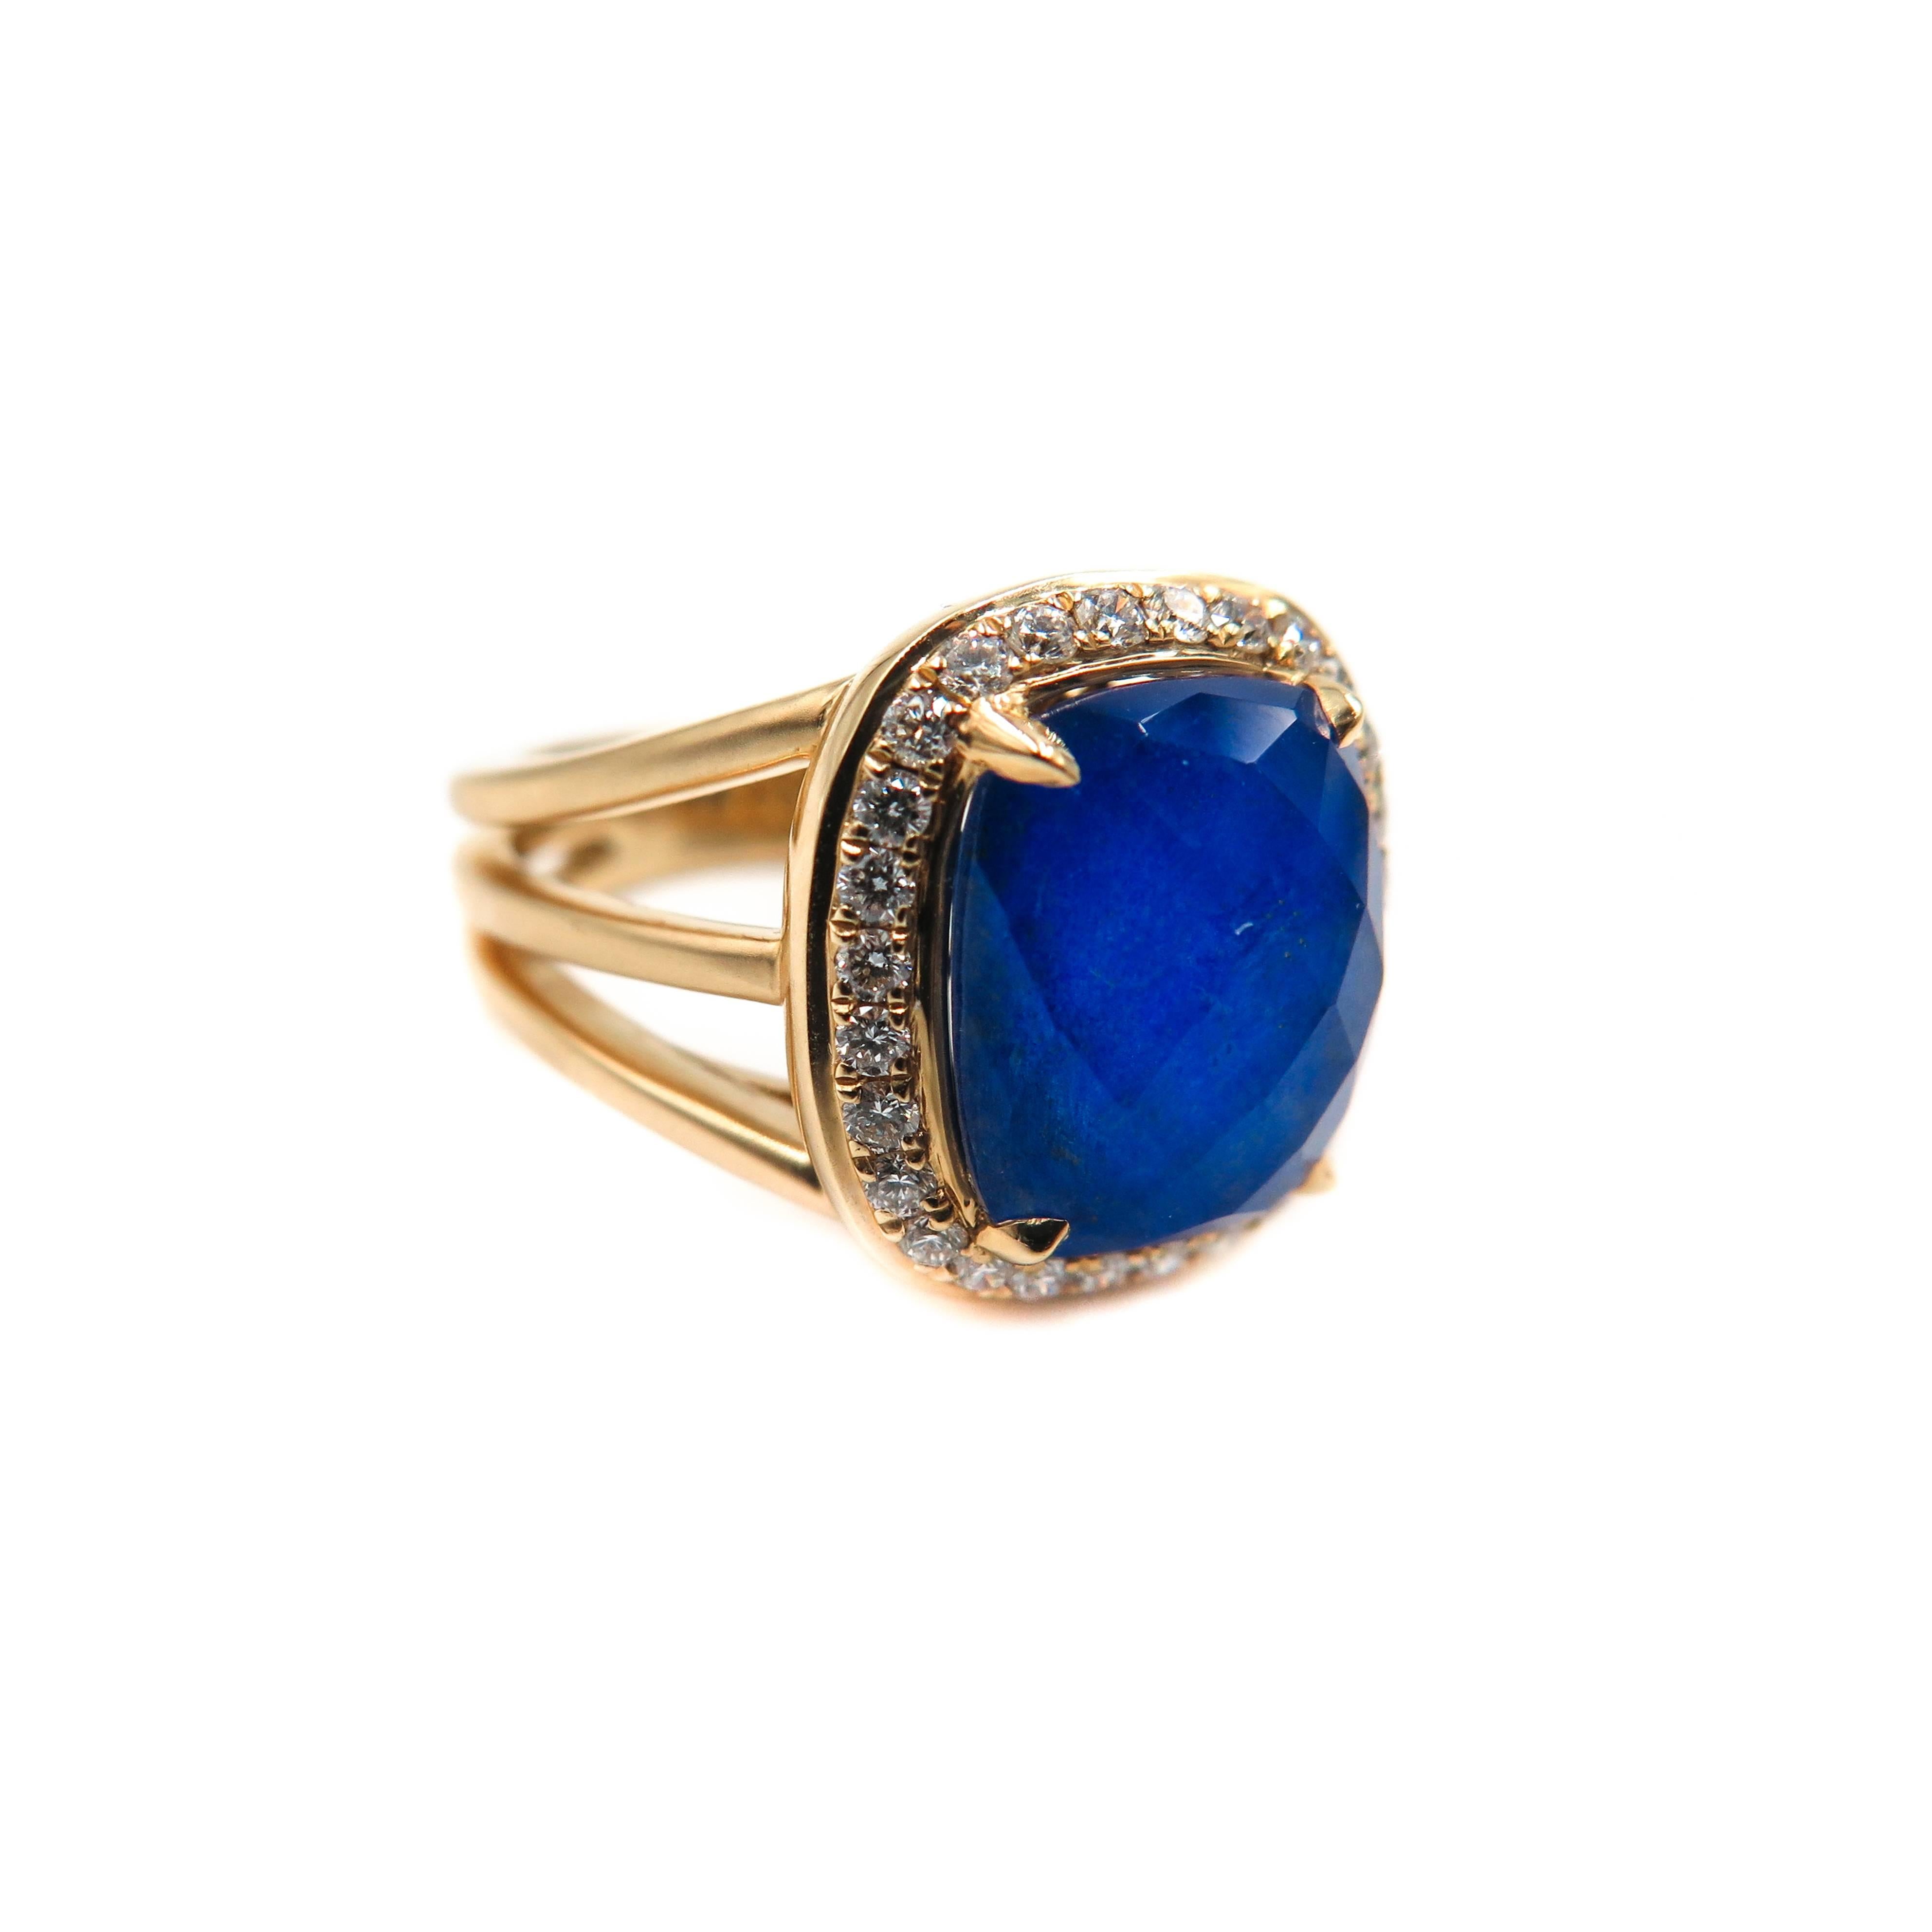 Royalty meets fashion. A deep intense blue with golden inclusions that shimmer likes stars in a night sky.
This gorgeous Lapis and Diamond Ring is the result of overlapping a beautiful faceted clear quartz over a deep blue lapis lazuli, creating